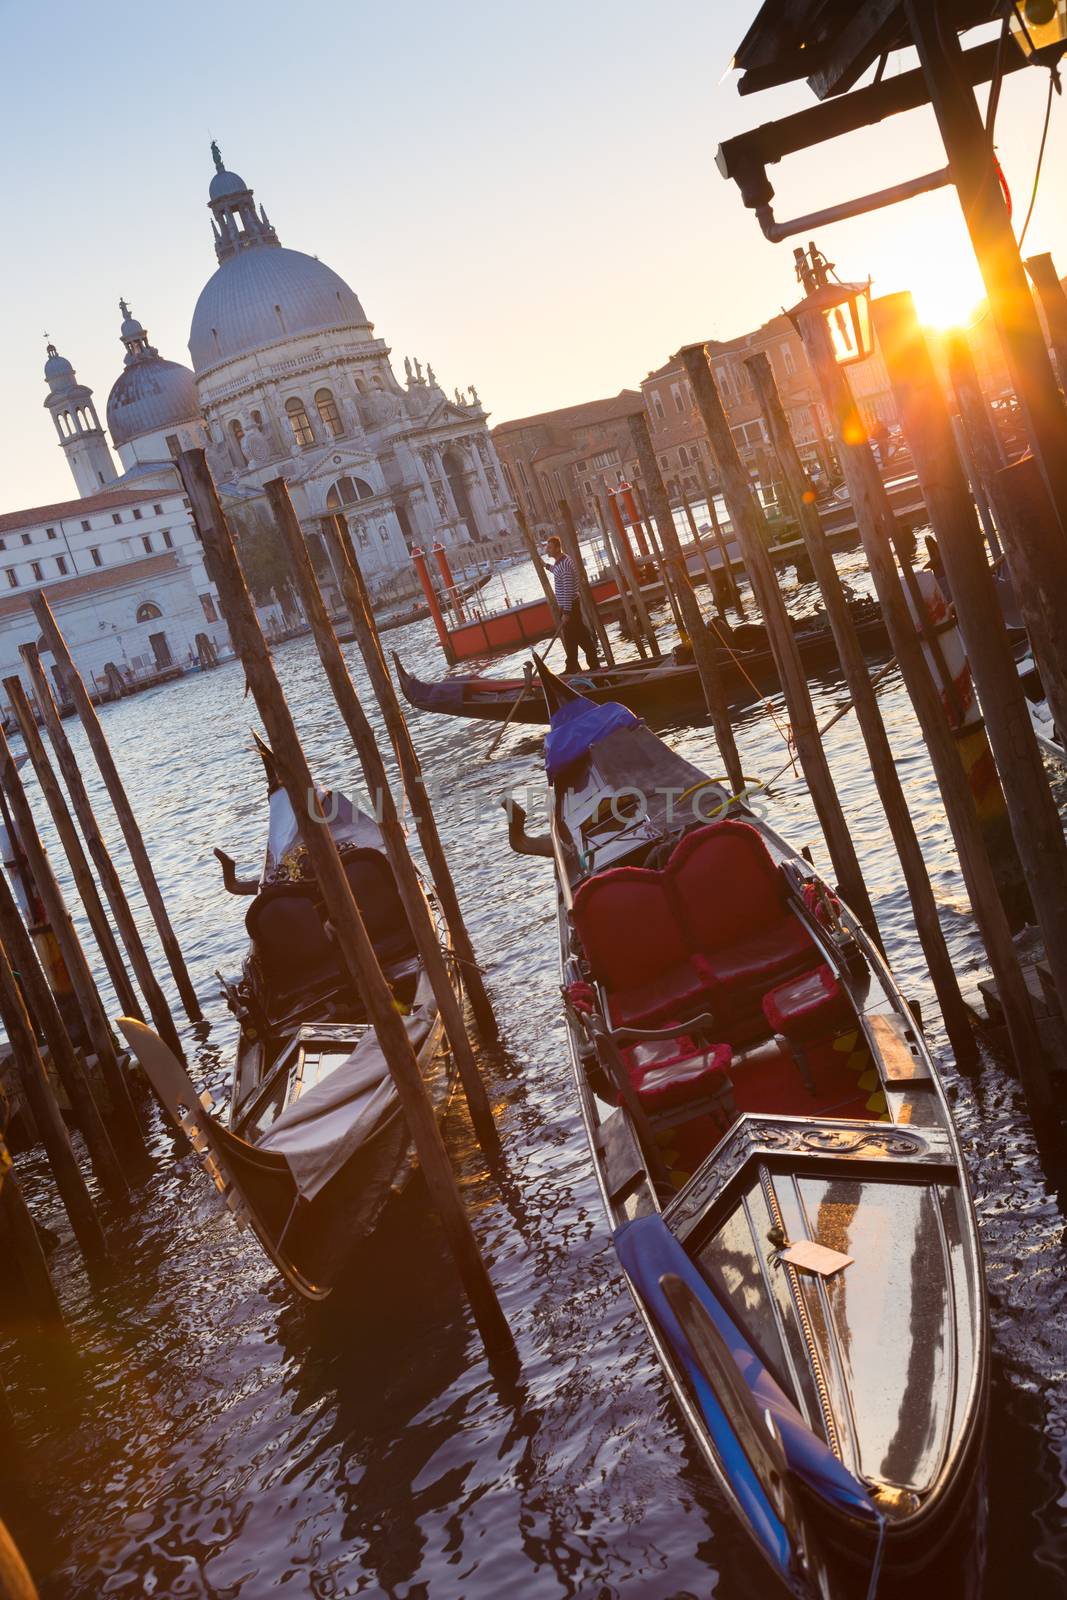 Venice, Italy - October 31, 2014: Traditional wooden boads and a gondolier in the Grand Canal in front of Santa Maria della Salute in sunset.